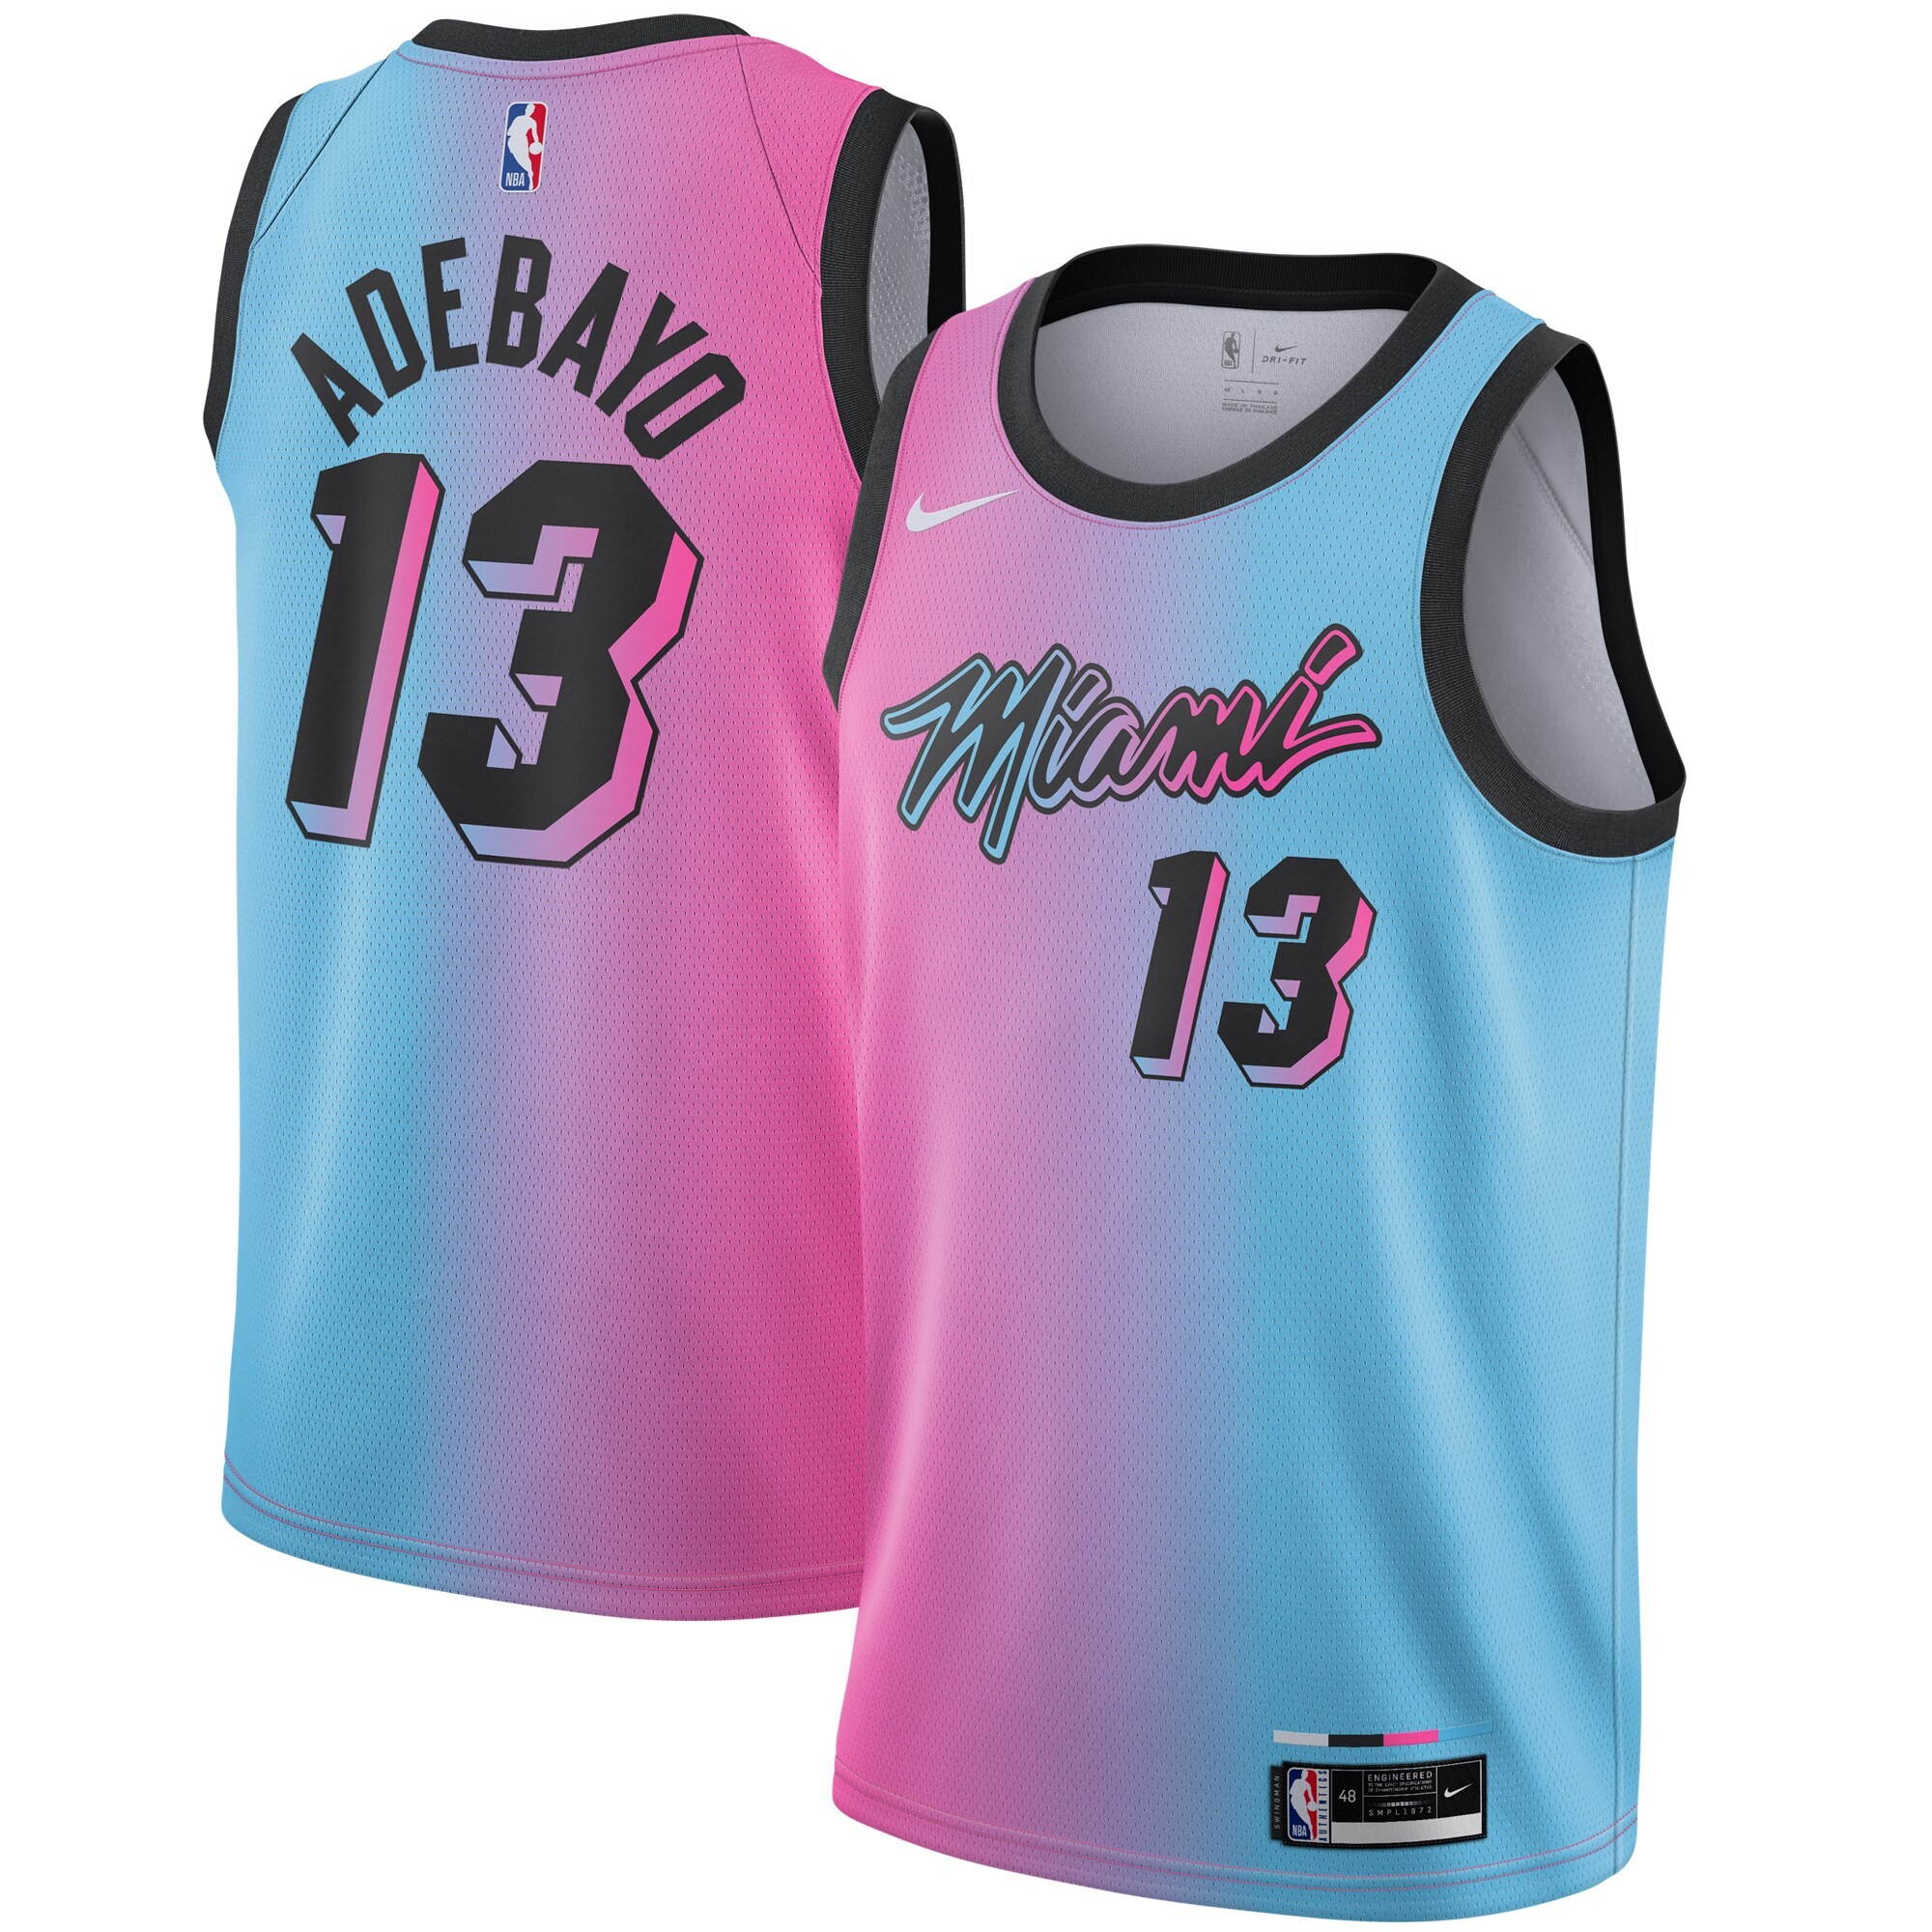 Straight Fire: Order your Miami Heat City Edition jersey now